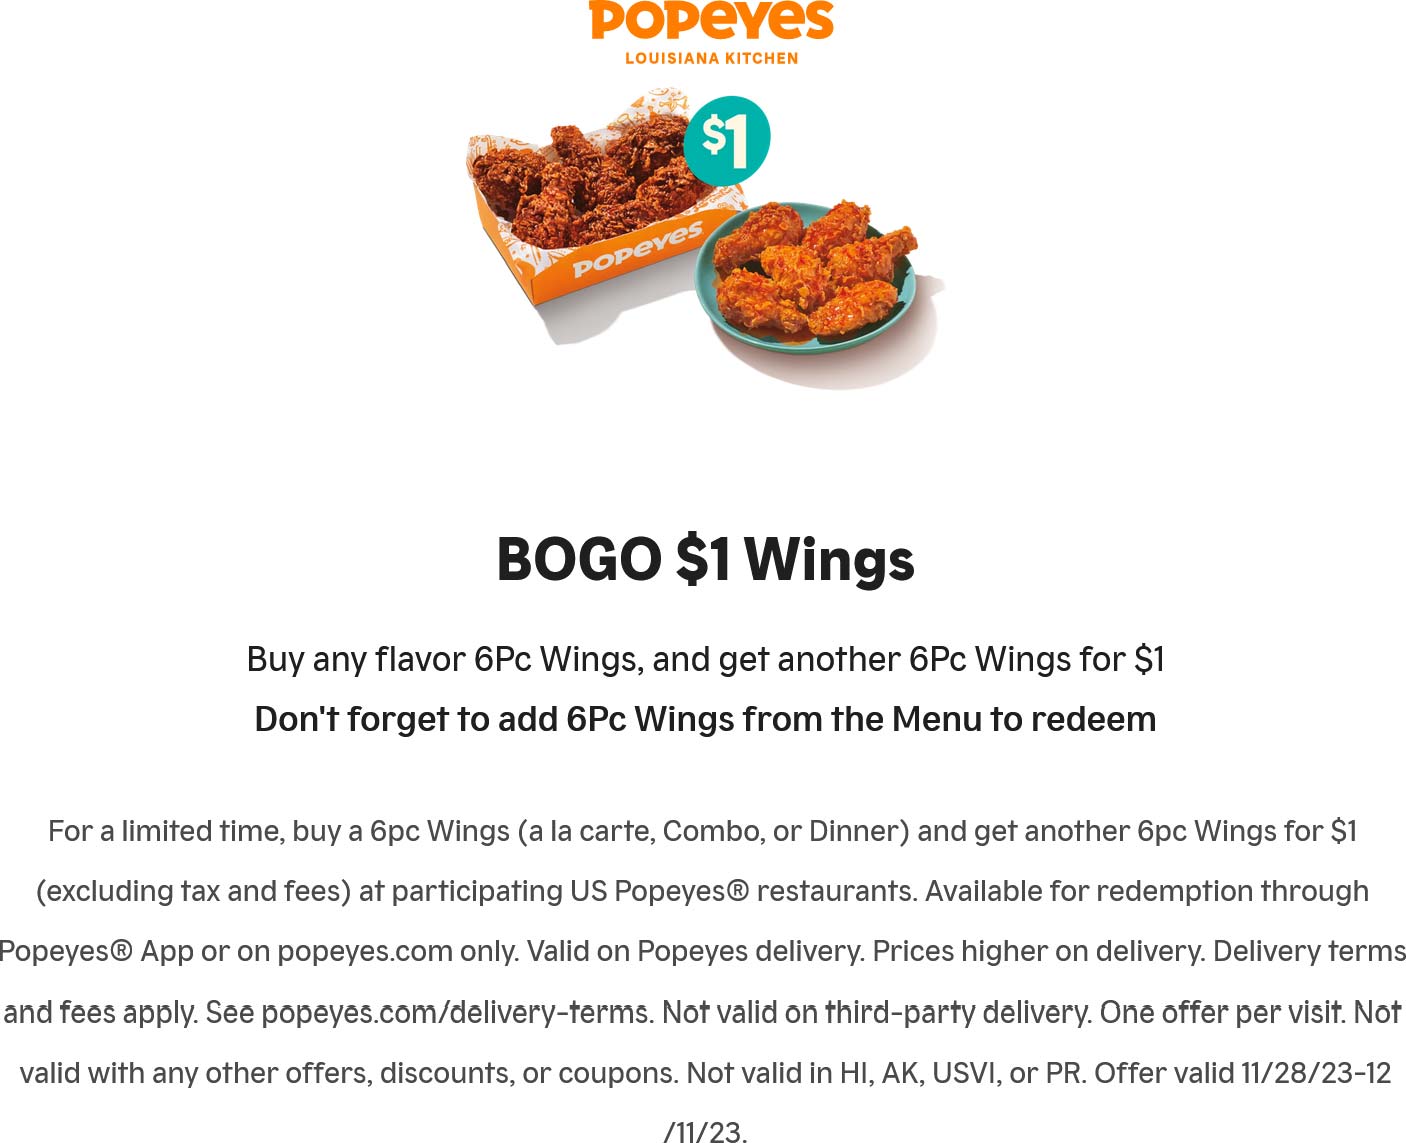 Second 6pc chicken wings $1 at Popeyes #popeyes